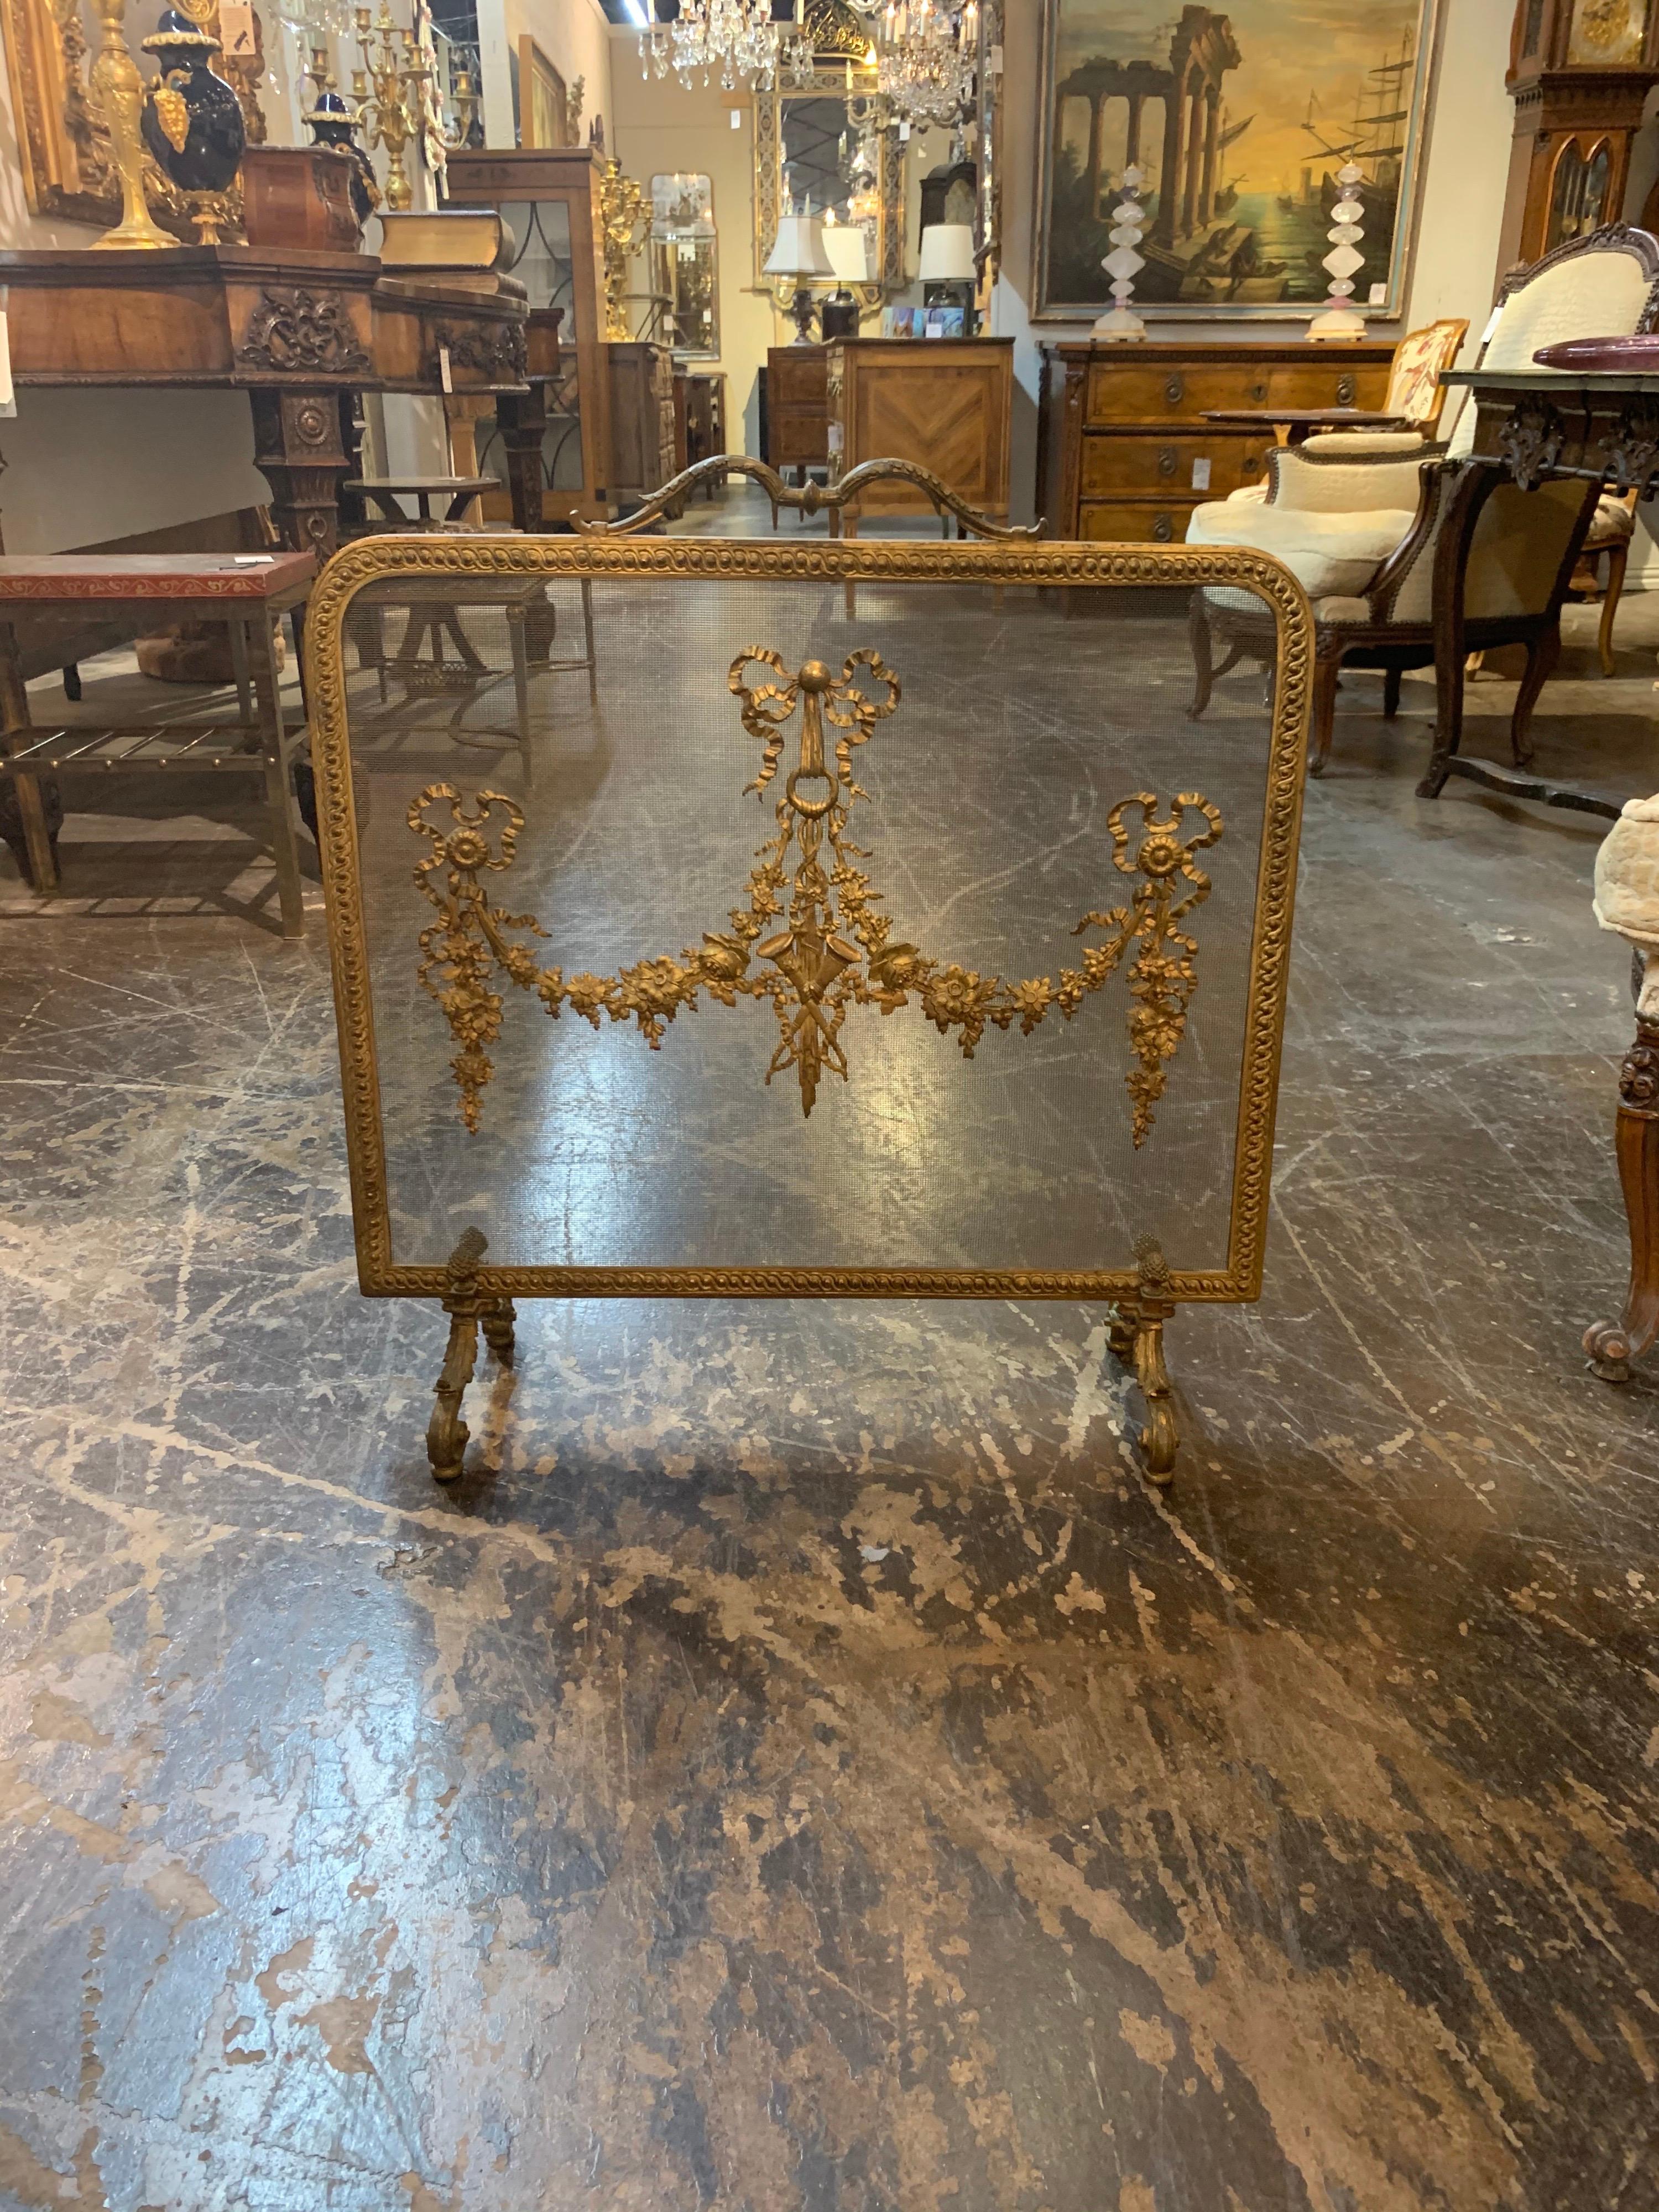 Beautiful 19th century French Louis XVI fireplace screen. Lovely decorative details including bows, floral images and musical instruments. An amazing piece of art!